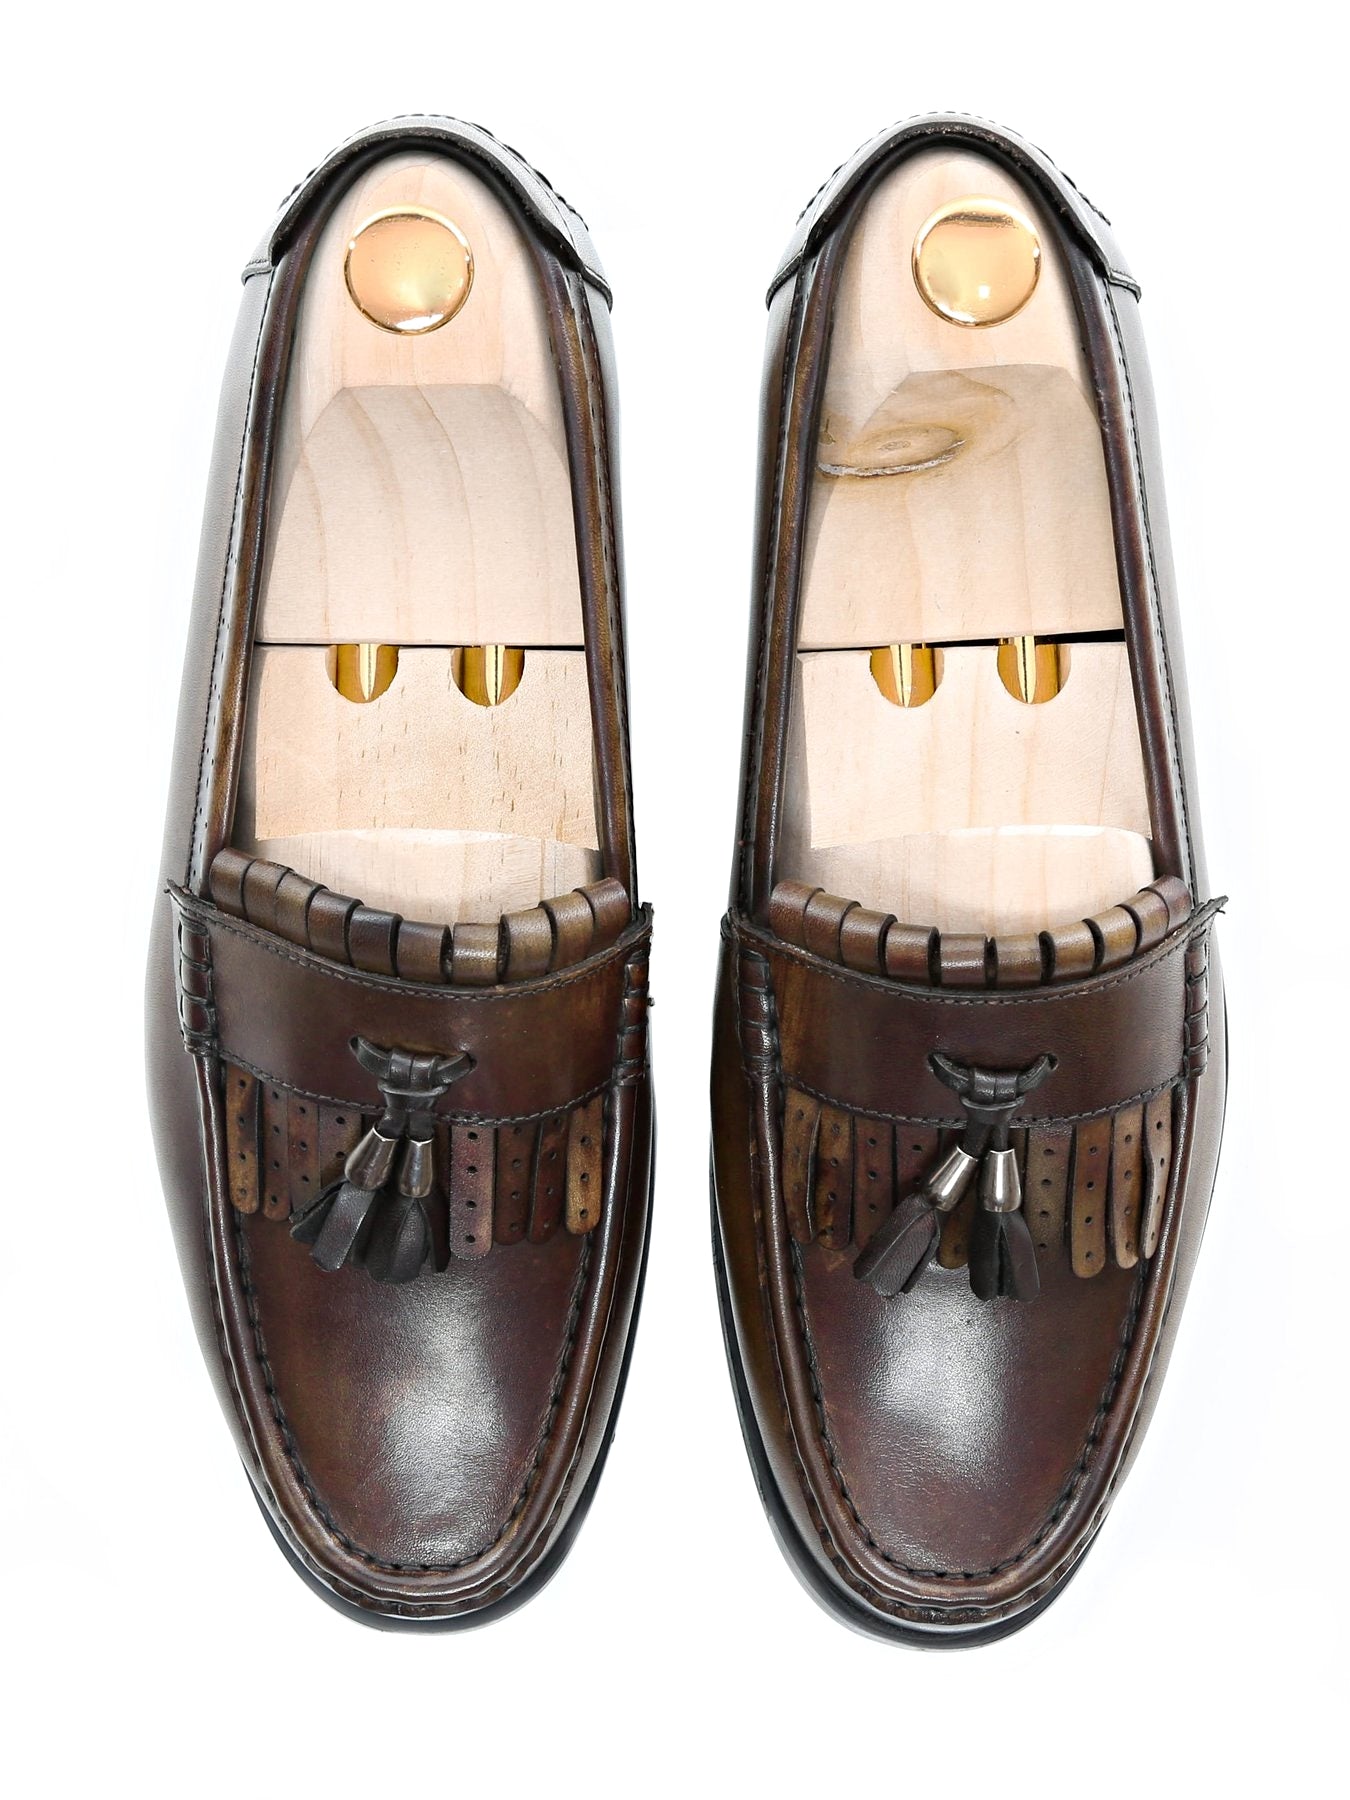 Fringe Classic Loafer - Khakis with Tassel (Hand Painted Patina) - Zeve Shoes